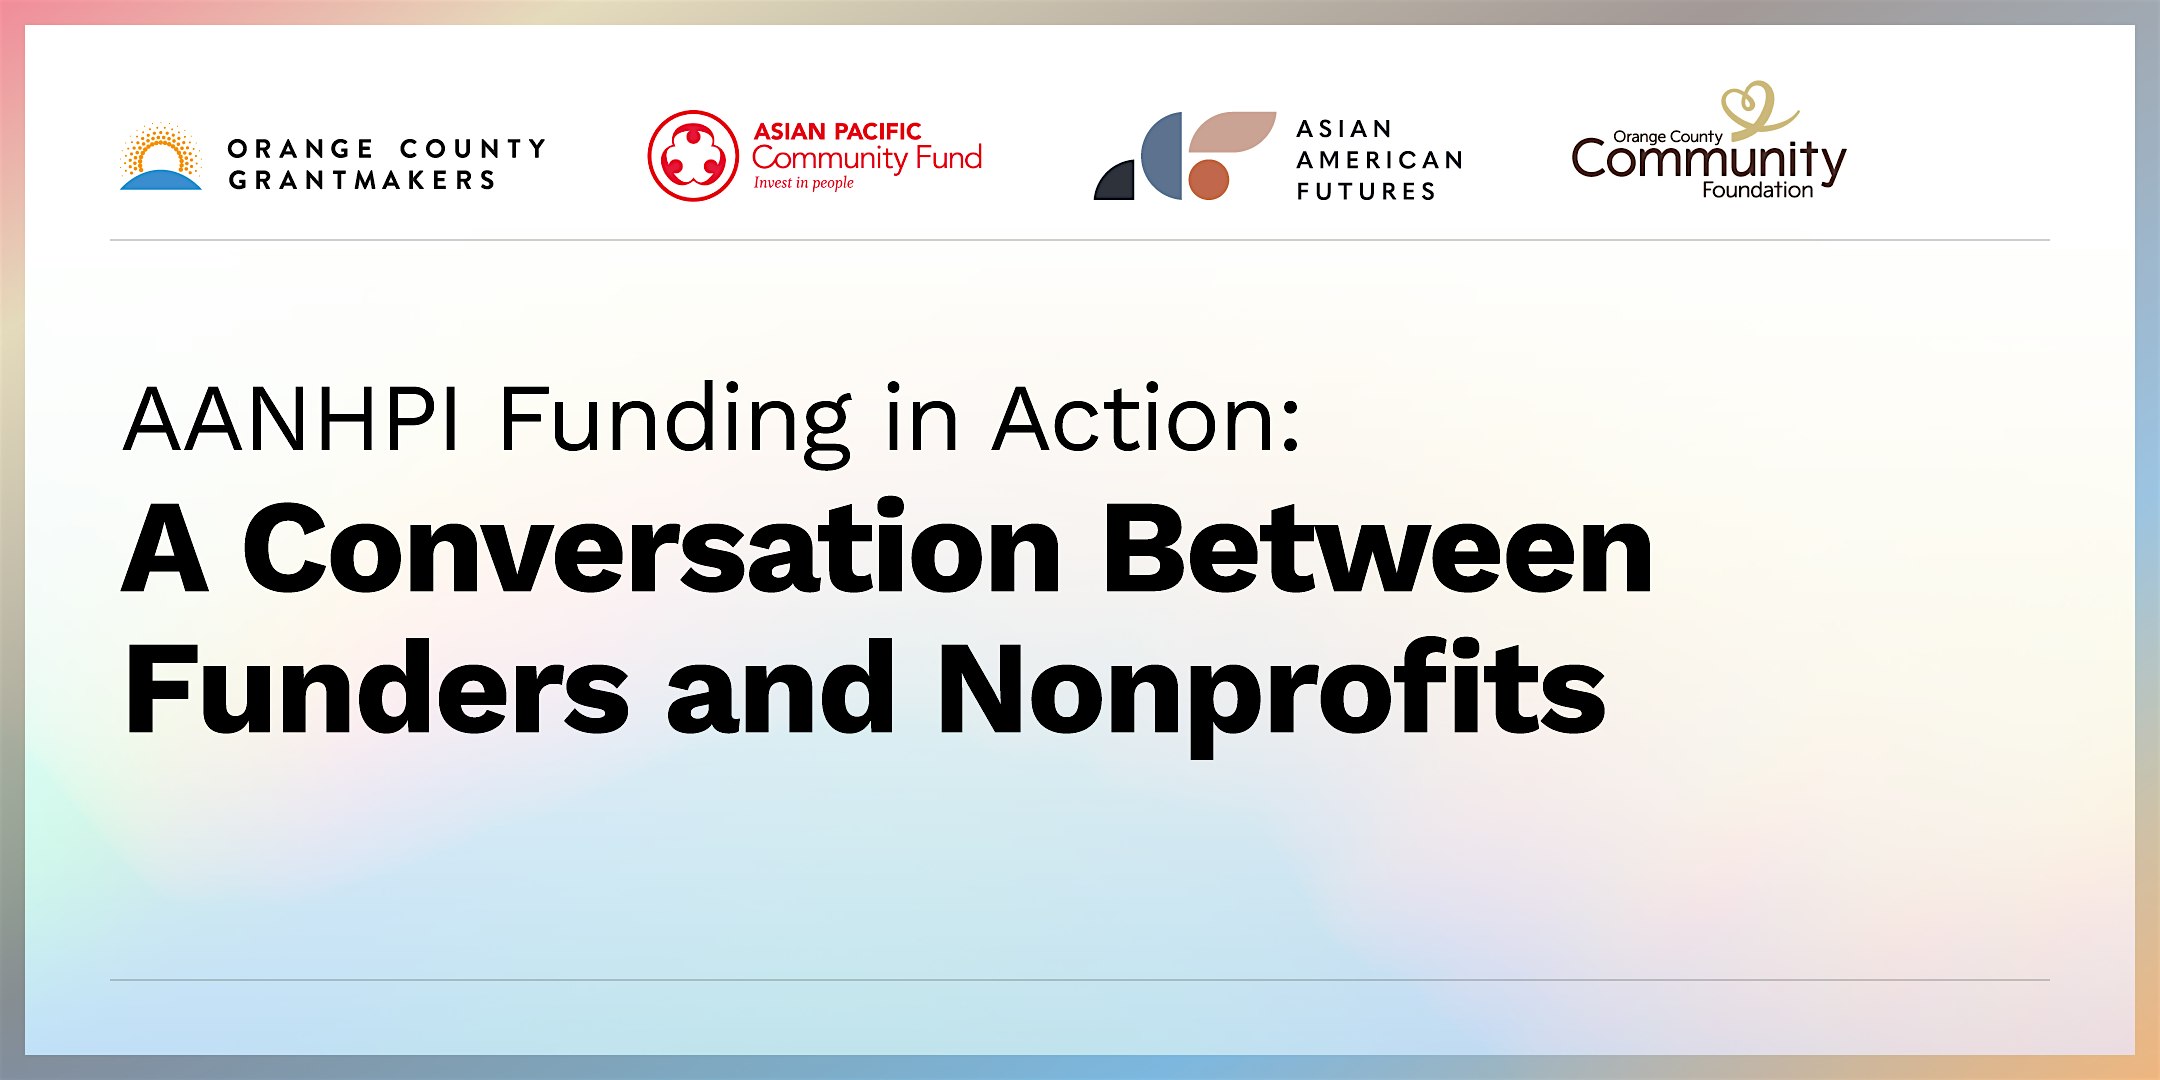 AANHPI Funding in Action: A Conversation Between Funders and Nonprofits